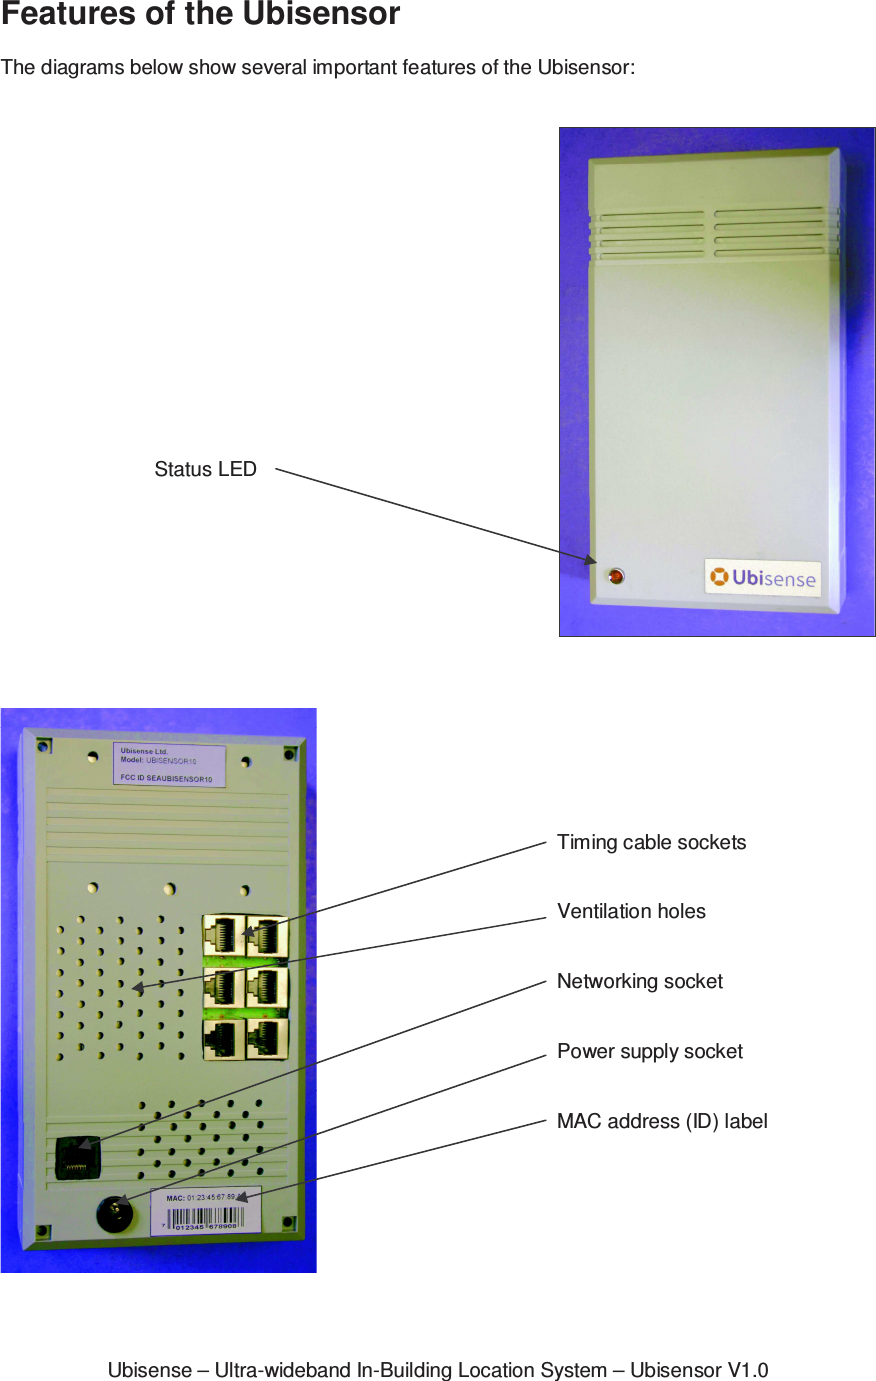 Ubisense – Ultra-wideband In-Building Location System – Ubisensor V1.0Features of the Ubisensor  The diagrams below show several important features of the Ubisensor:        Status LED   Timing cable sockets   Ventilation holes   Networking socket   Power supply socket   MAC address (ID) label  